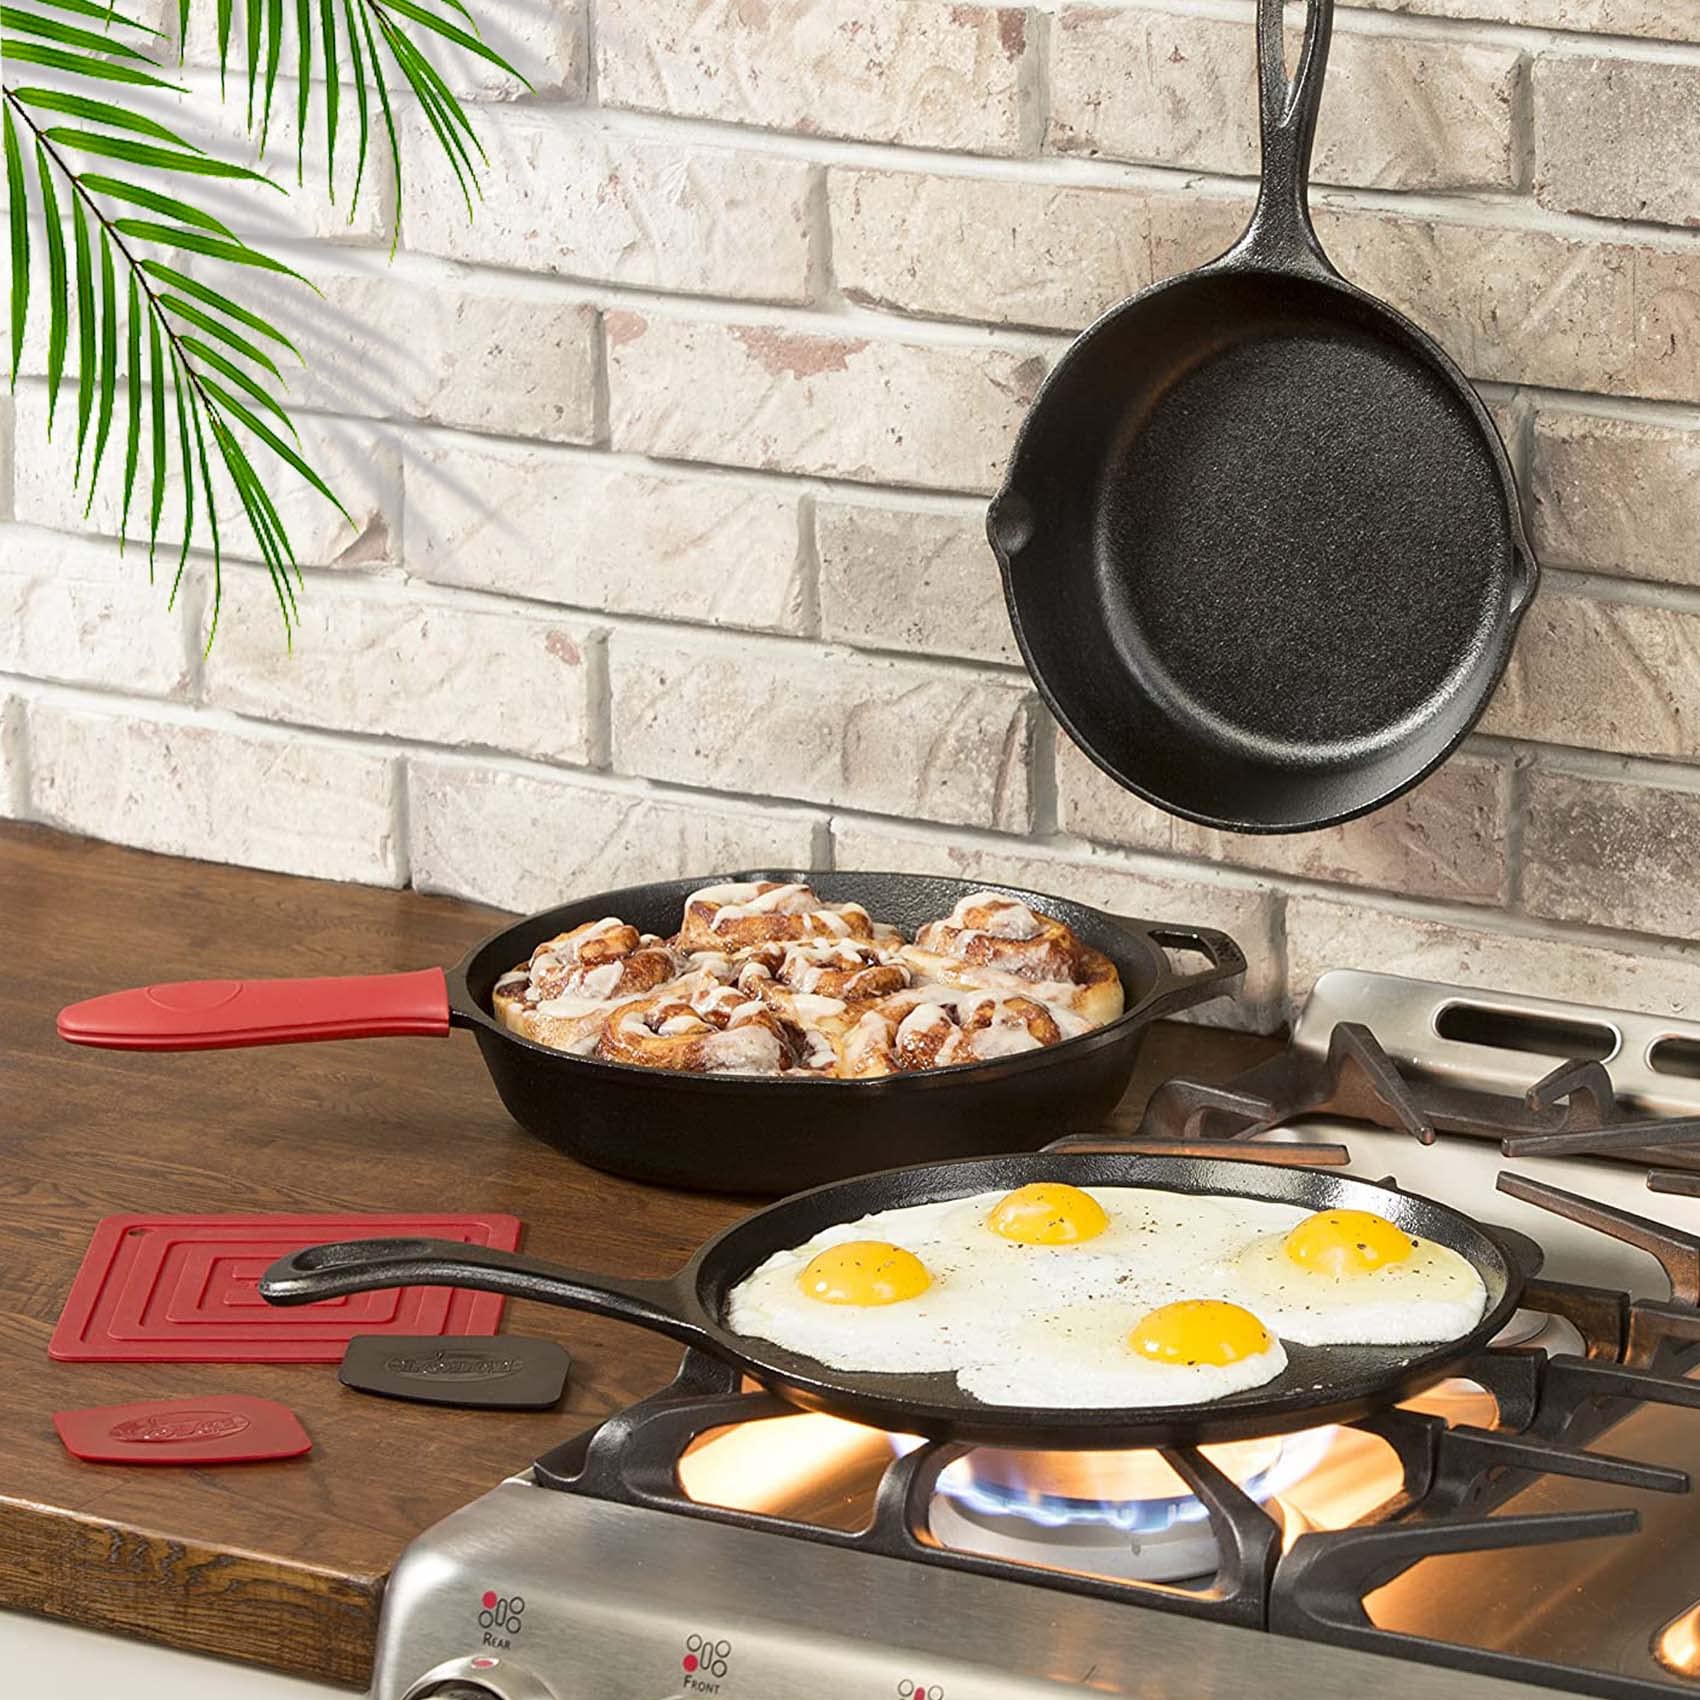 Pre-Seasoned Cast Iron Skillet Set of 3 | 6", 8" & 10" Cast Iron Frying Pans with 3 Heat-Resistant Holders & Oil Brush - Indoor and Outdoor Use - Oven Grill Stovetop Induction Safe Cookware